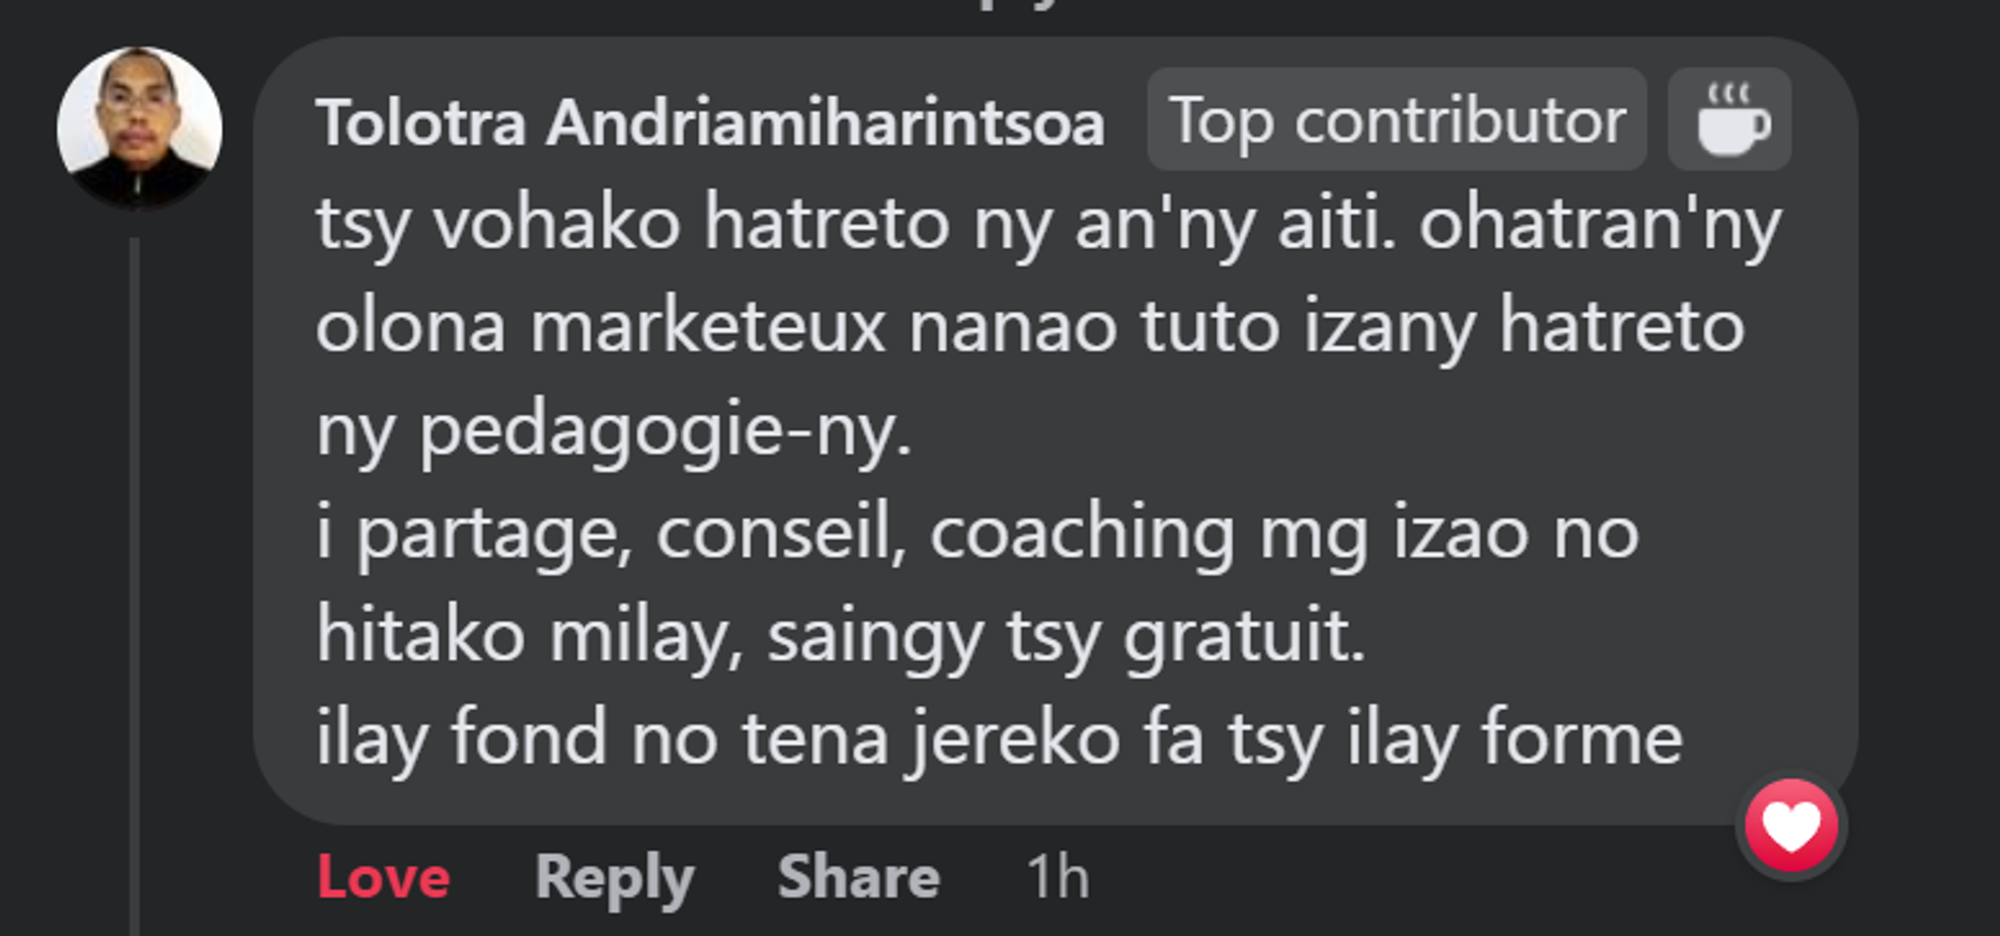 Translation: I’m not really into AITI (my Facebook page in Malagasy). He is like a marketer who makes tutorials. I focus more on the substance rather than the form.